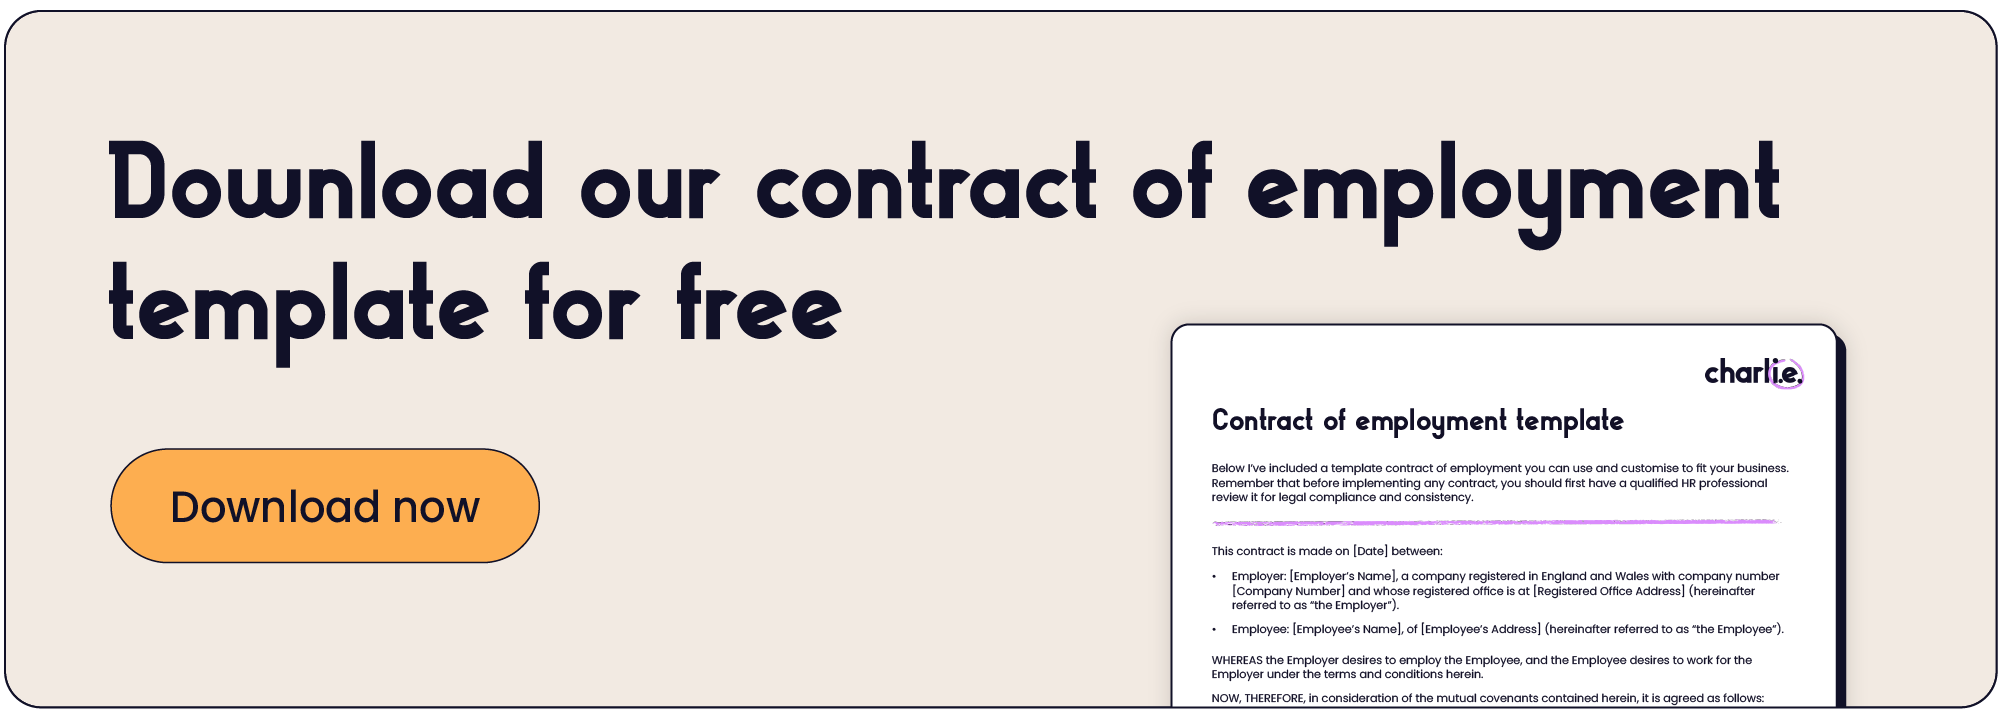 Download our contract of employment-01.webp